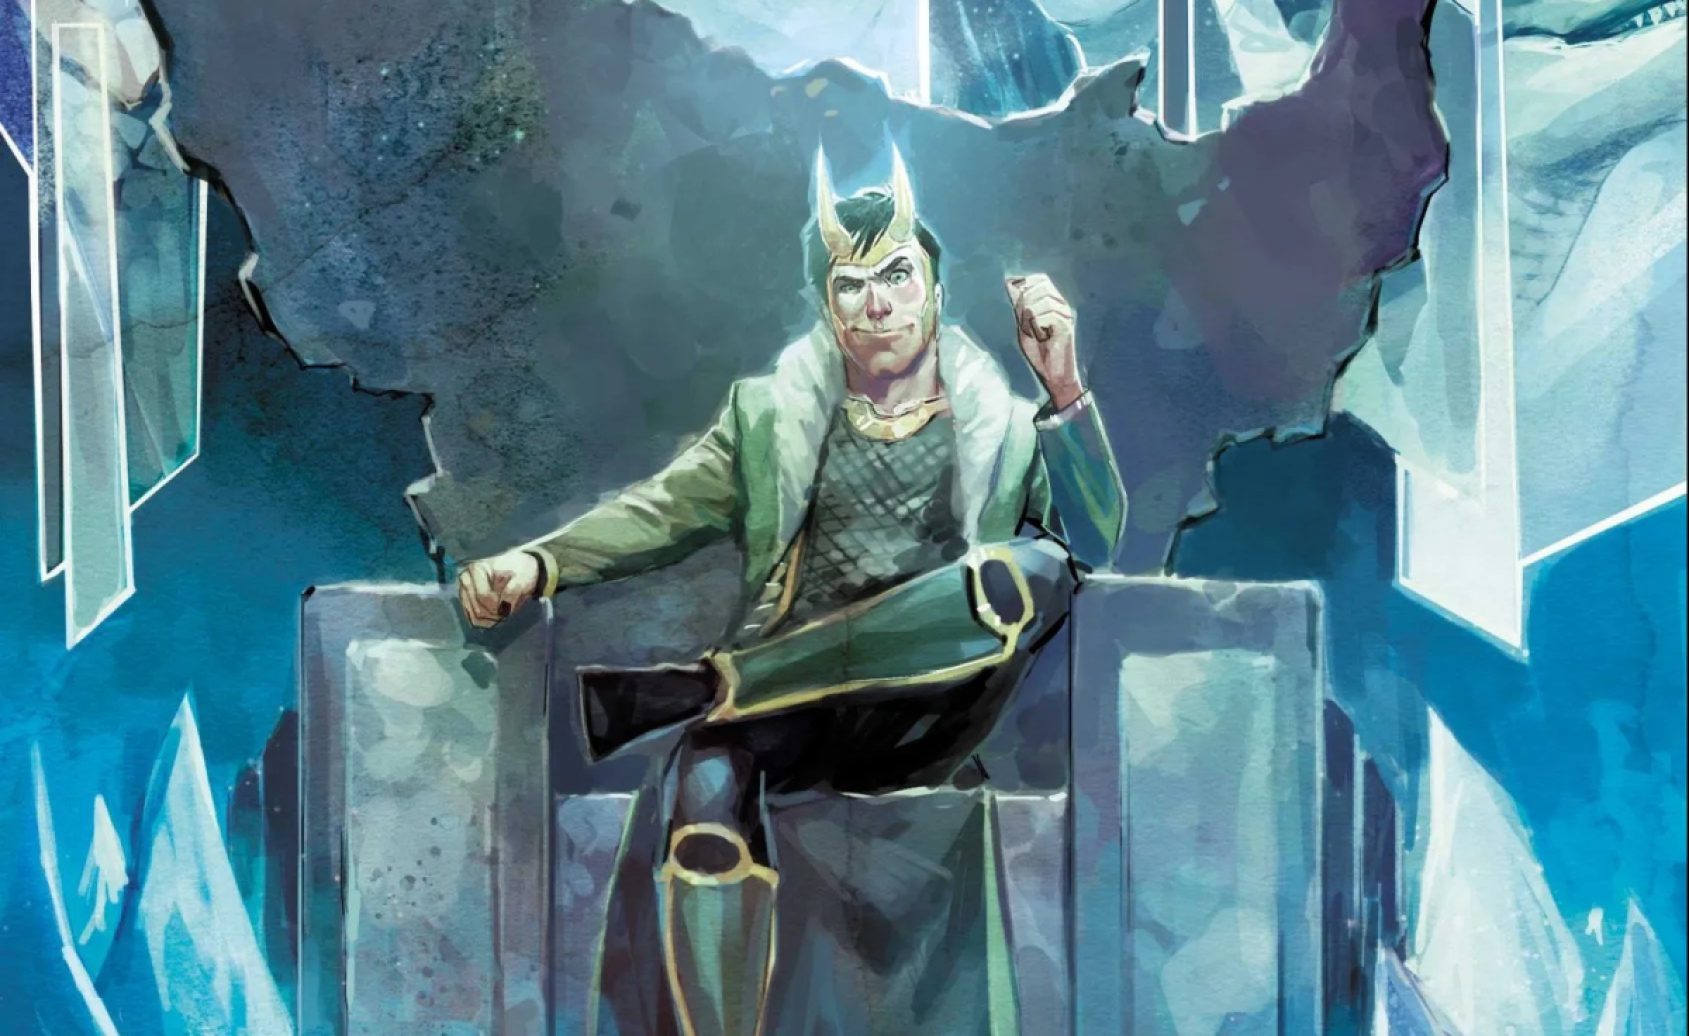 Loki sits on an ice throne, smiling. Art by Rod Reis.